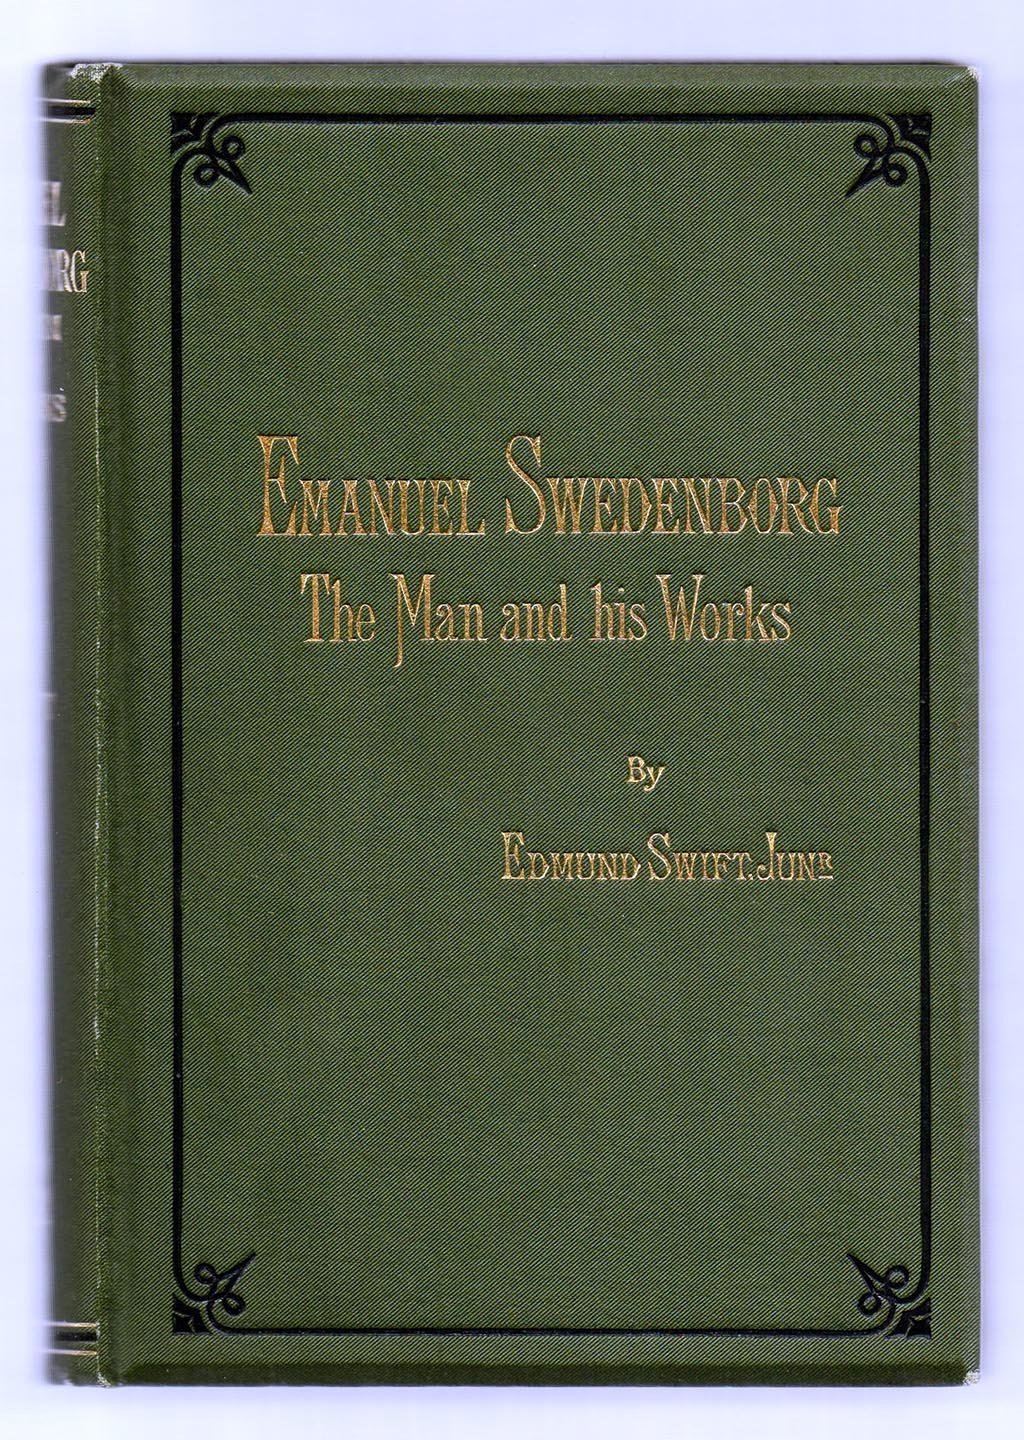 Emanuel Swedenborg: The Man and his Works